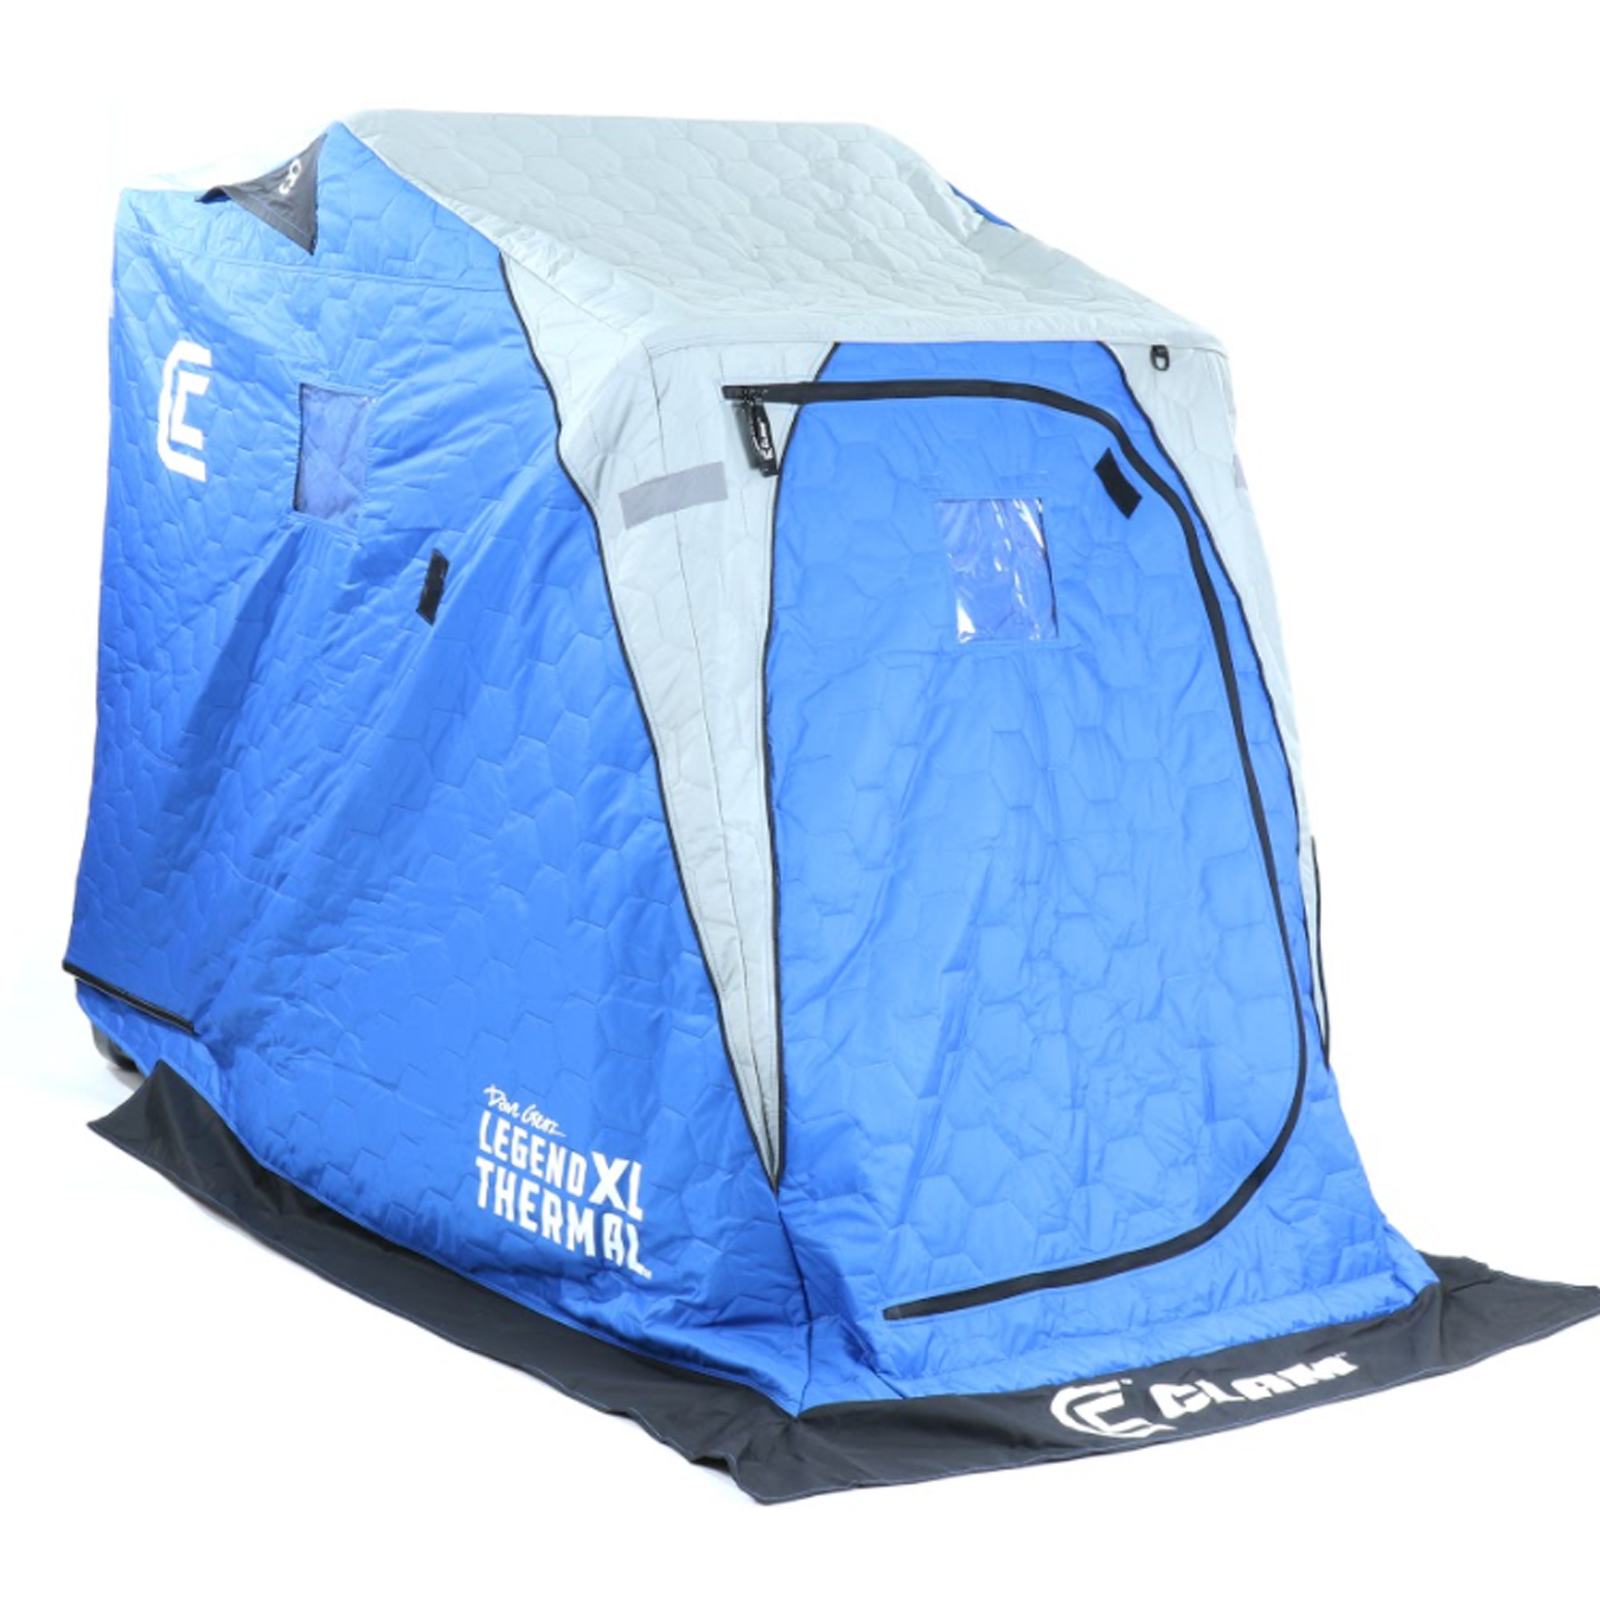 Clam Legend XL Thermal 1 Man Flip-Over Shelter